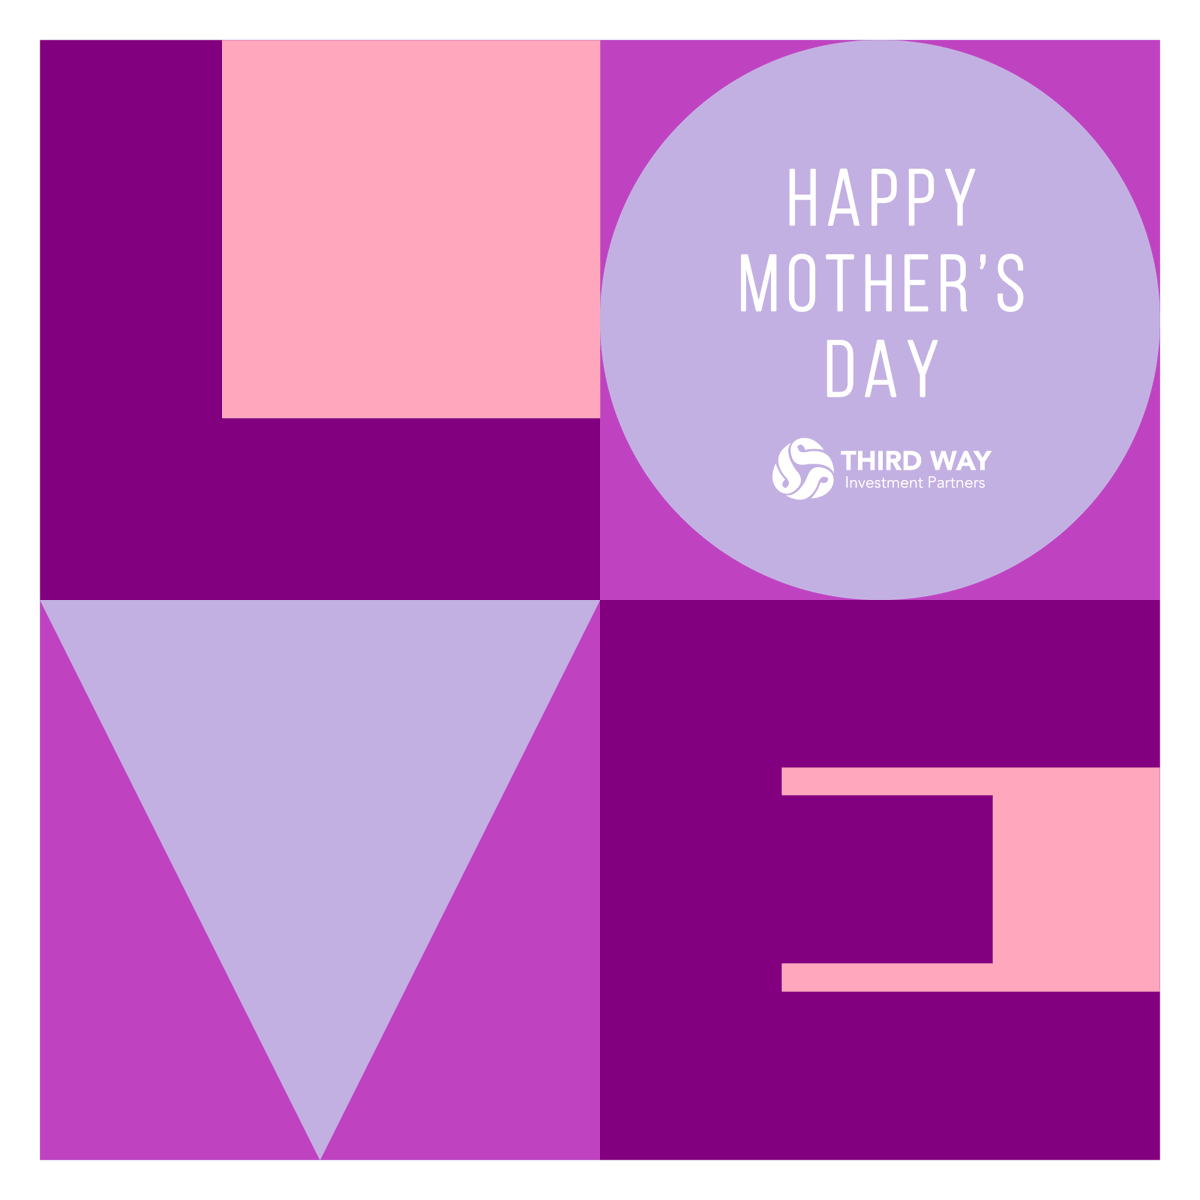 Happy Mother's Day from Third Way! We honour and celebrate all the incredible mothers past and present whose strength, love, and dedication inspire us daily. Thank you for your remarkable love!💐 

#LeadTheWay #MothersDay